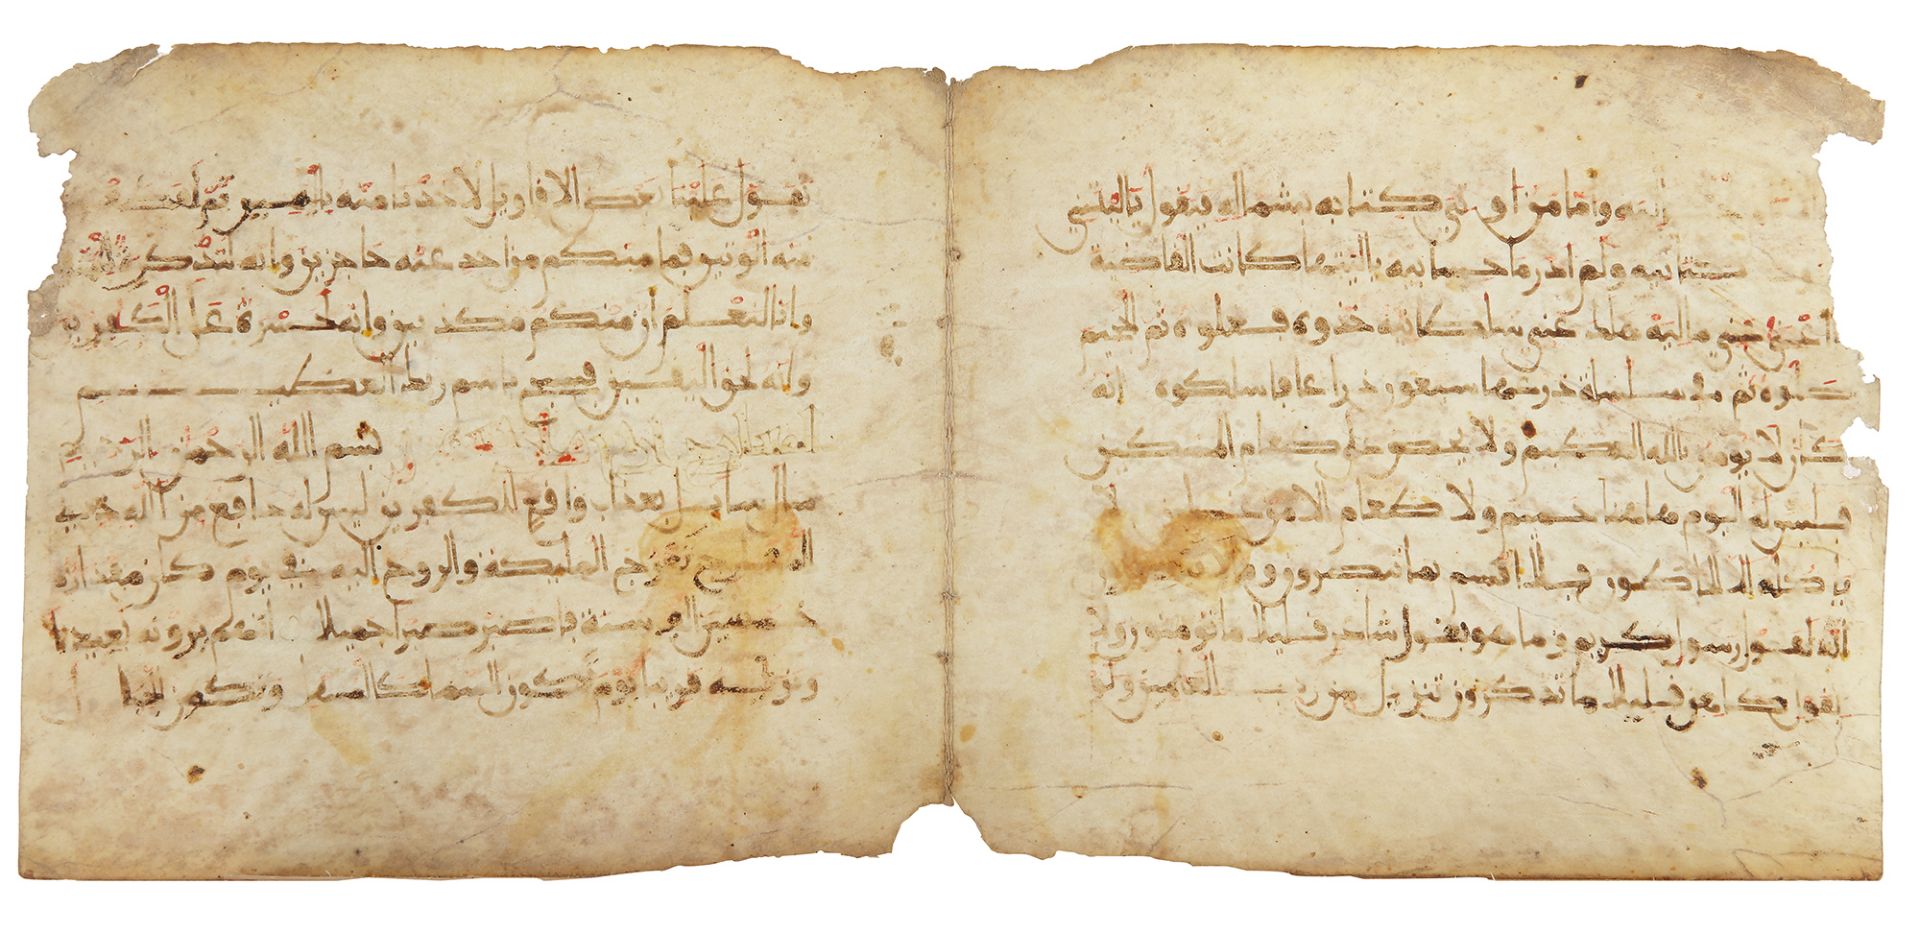 TWO QURAN FOLIOS FROM A MAGHRIBI QURAN, NORTH AFRICA, 13TH-14TH CENTURY